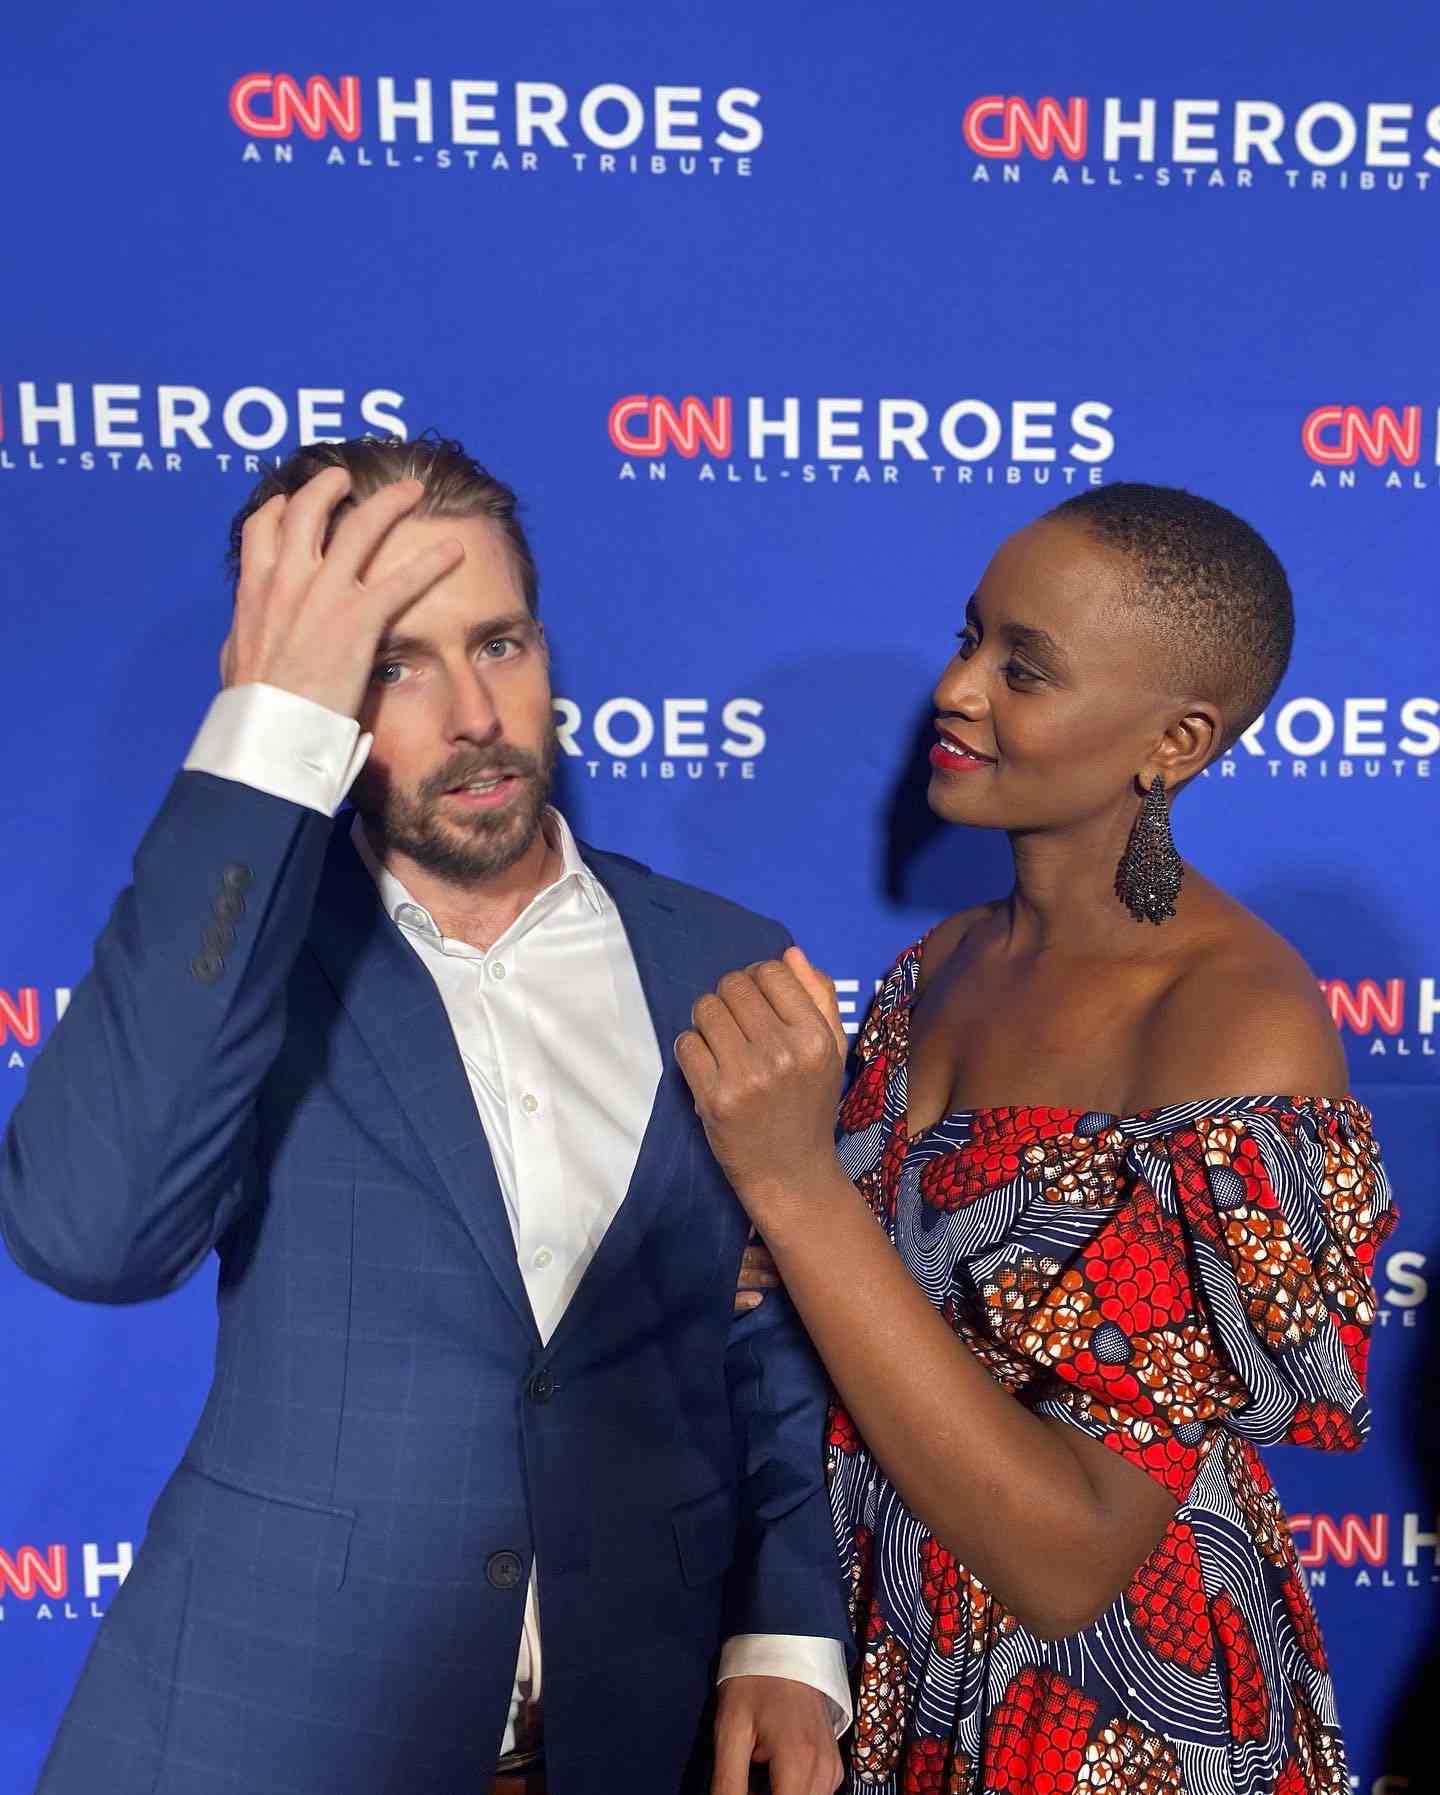 A side Portrait Nelly Cheboi and Tyler Cinnamon at the CNN Heroes red carpet